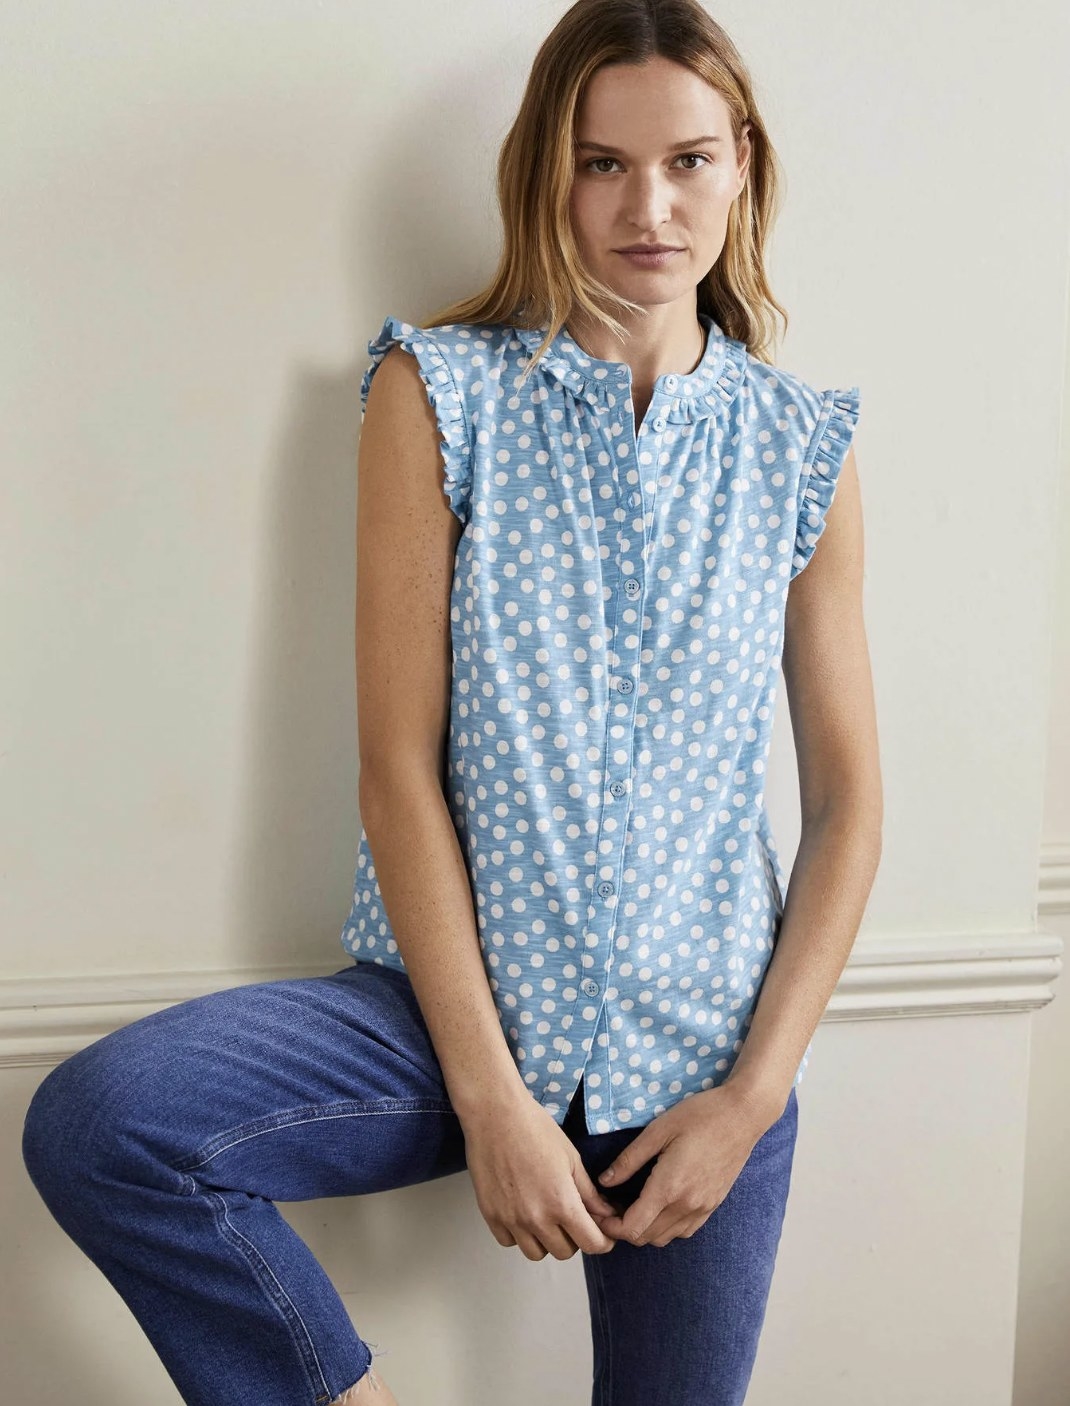 Model wearing the blue with white polka dots tank untucked over jeans